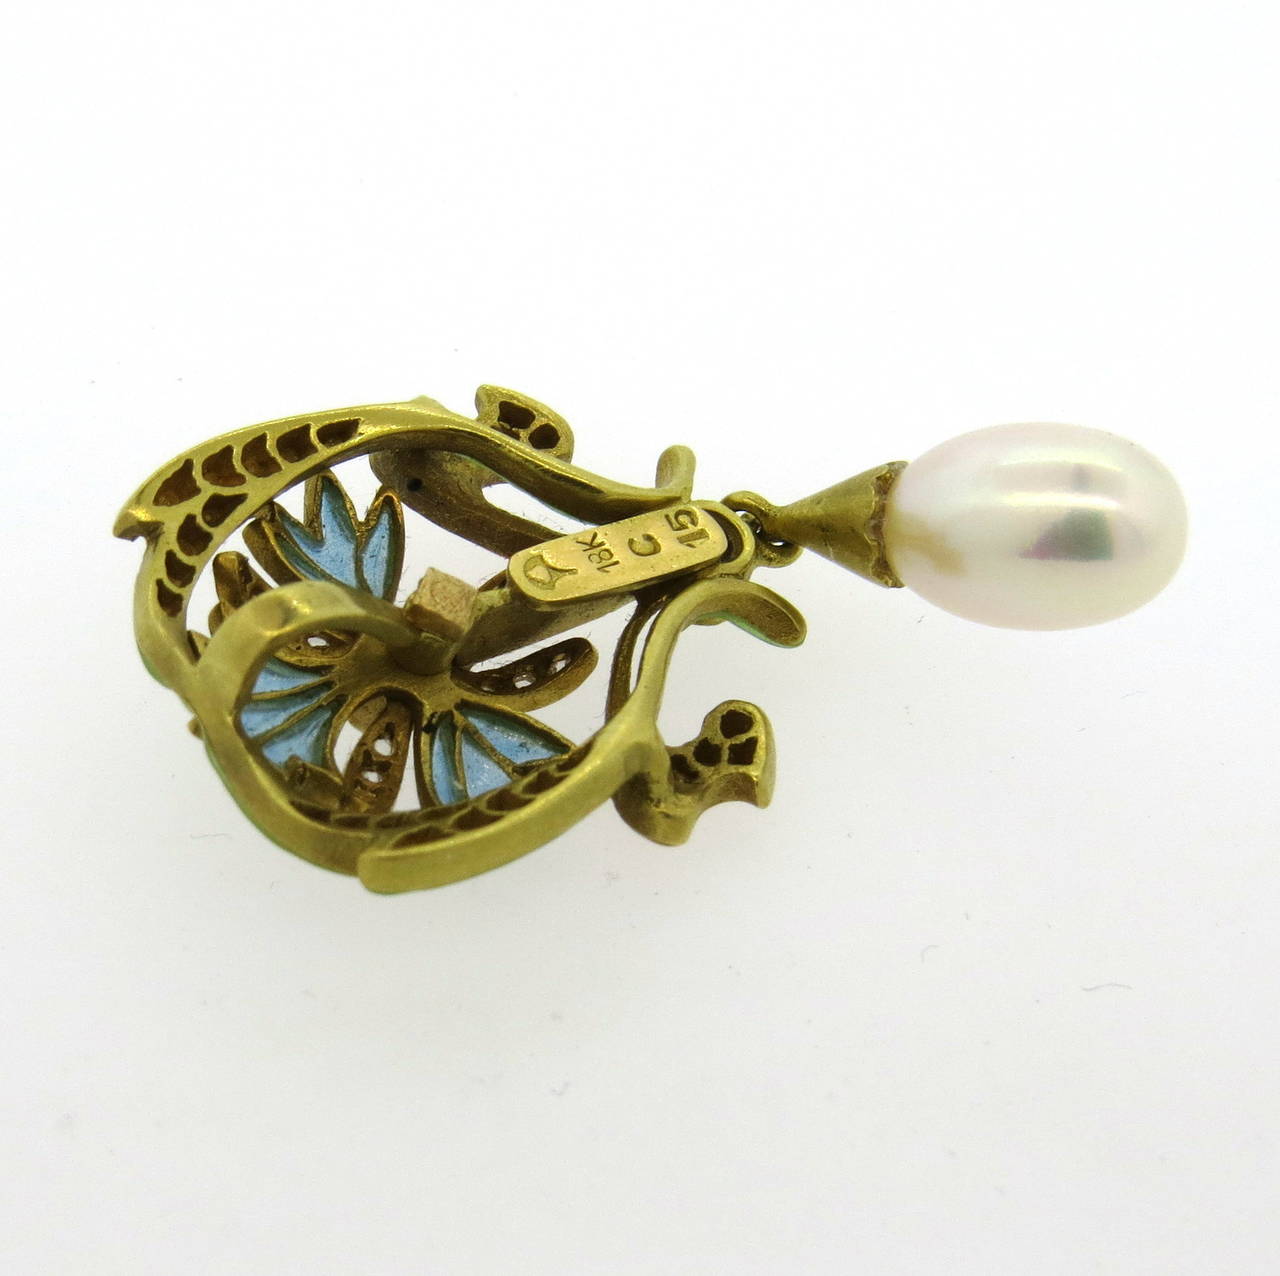 Delicate 18k gold plique a jour brooch, decorated with round brilliant and rose cut diamonds and pearl drop. Brooch measures 40mmin length with the drop x 21mm wide, can be also worn as a pendant. Weight of the piece - 6.4 grams